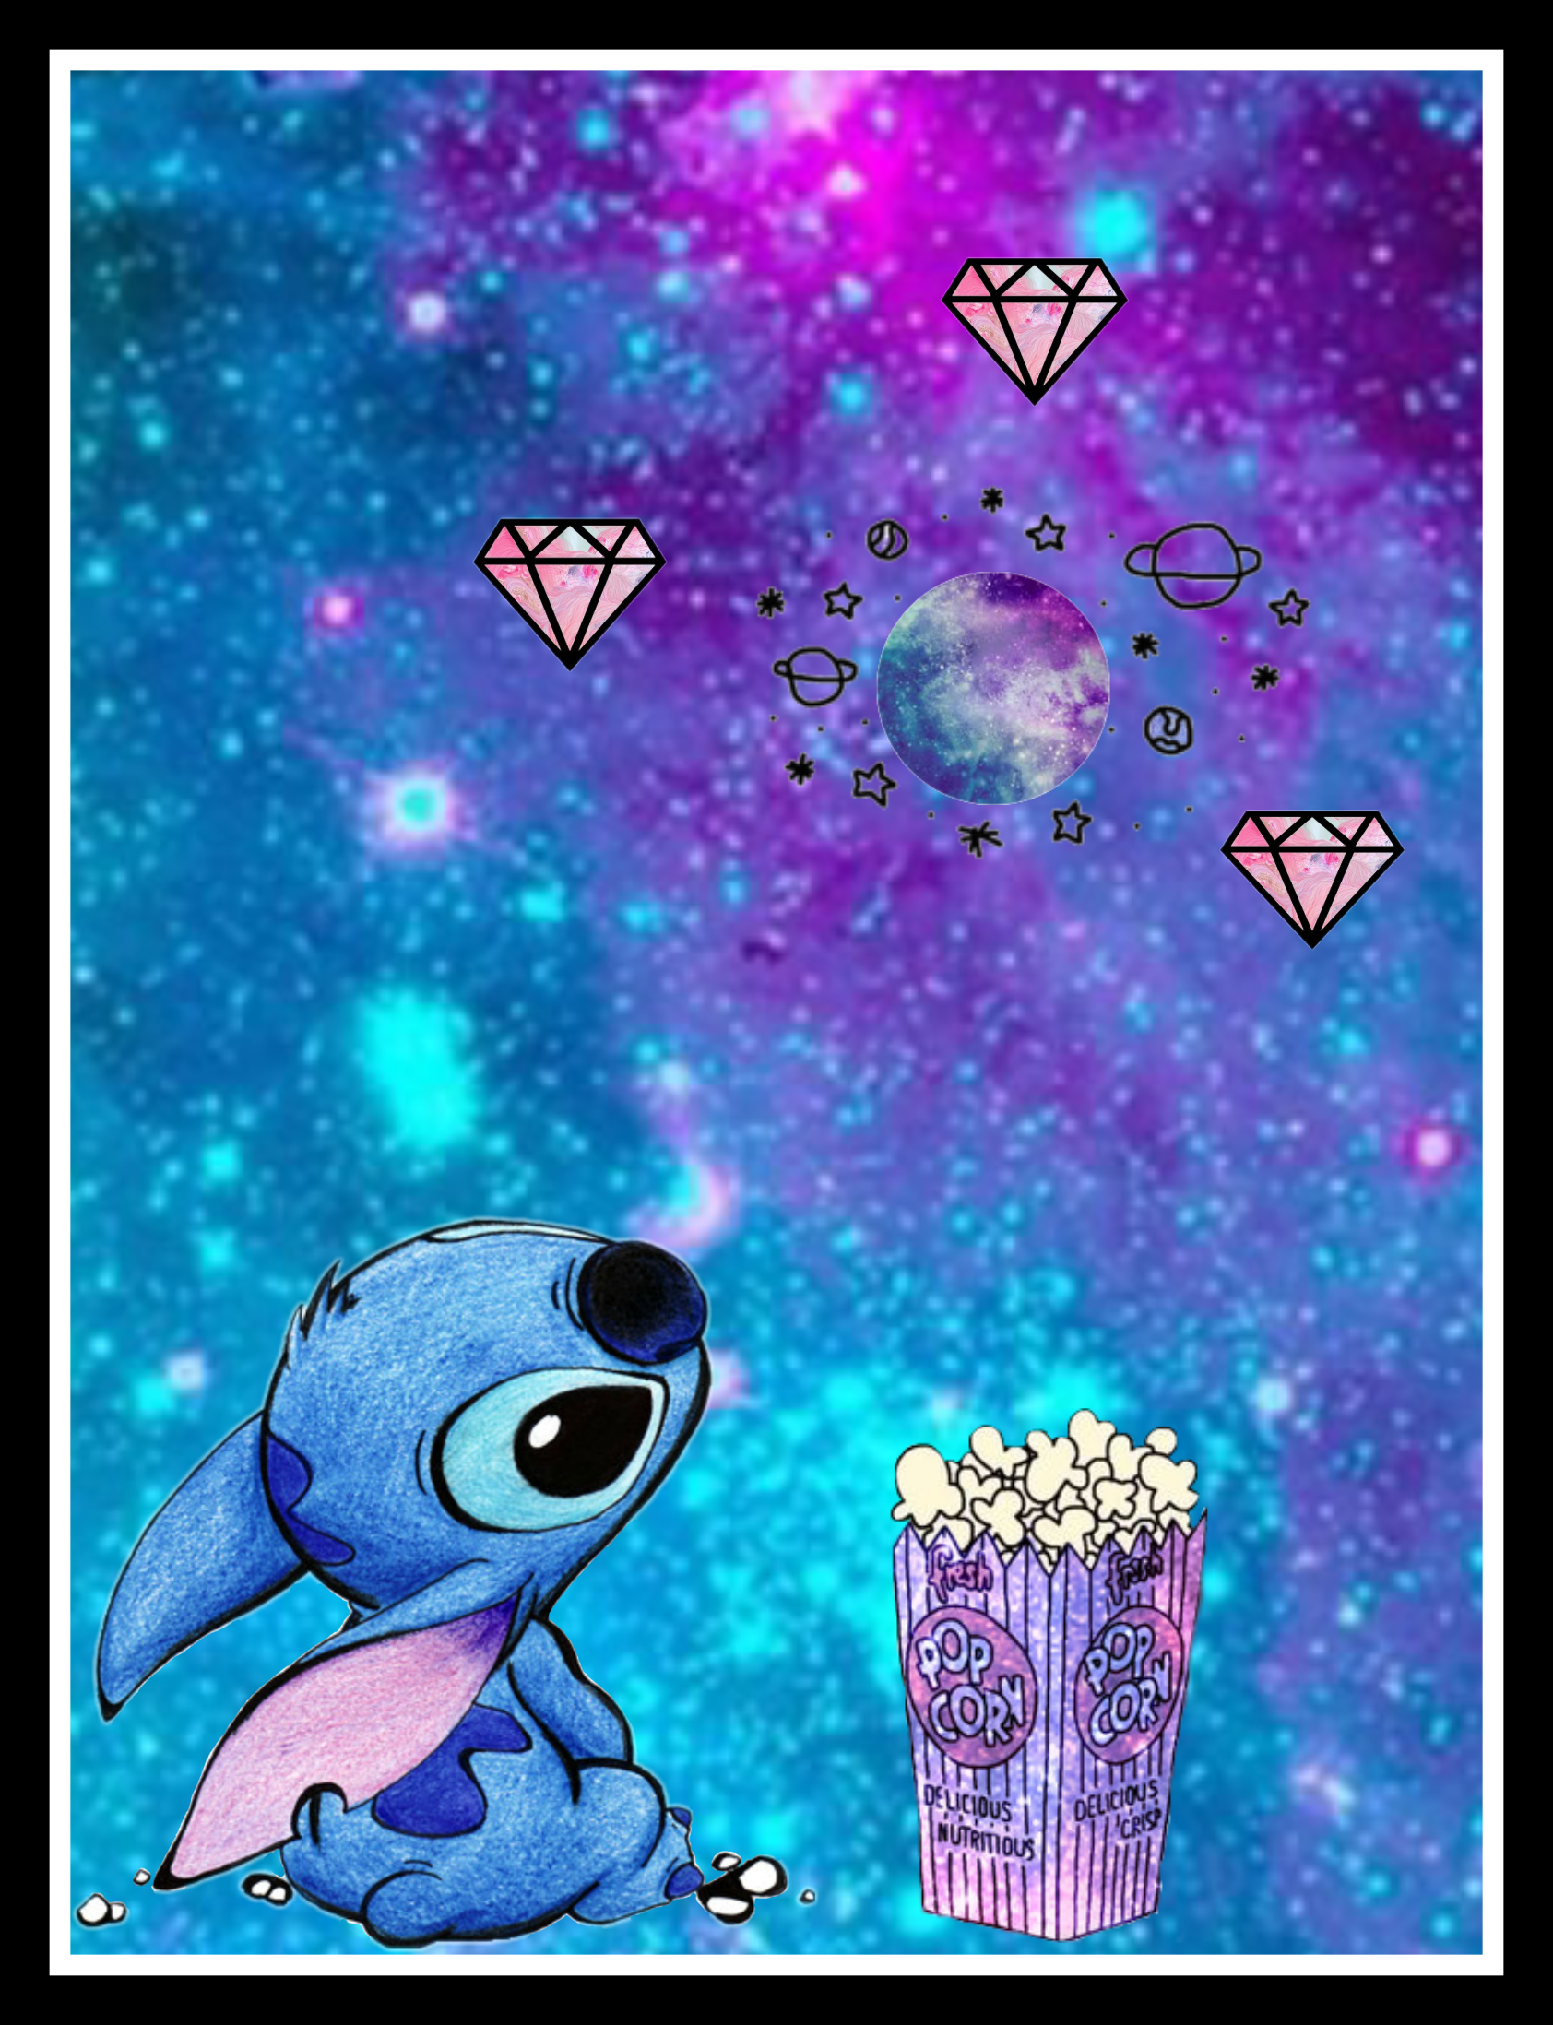 Stitch Blue And Pink Wallpaper - carrotapp